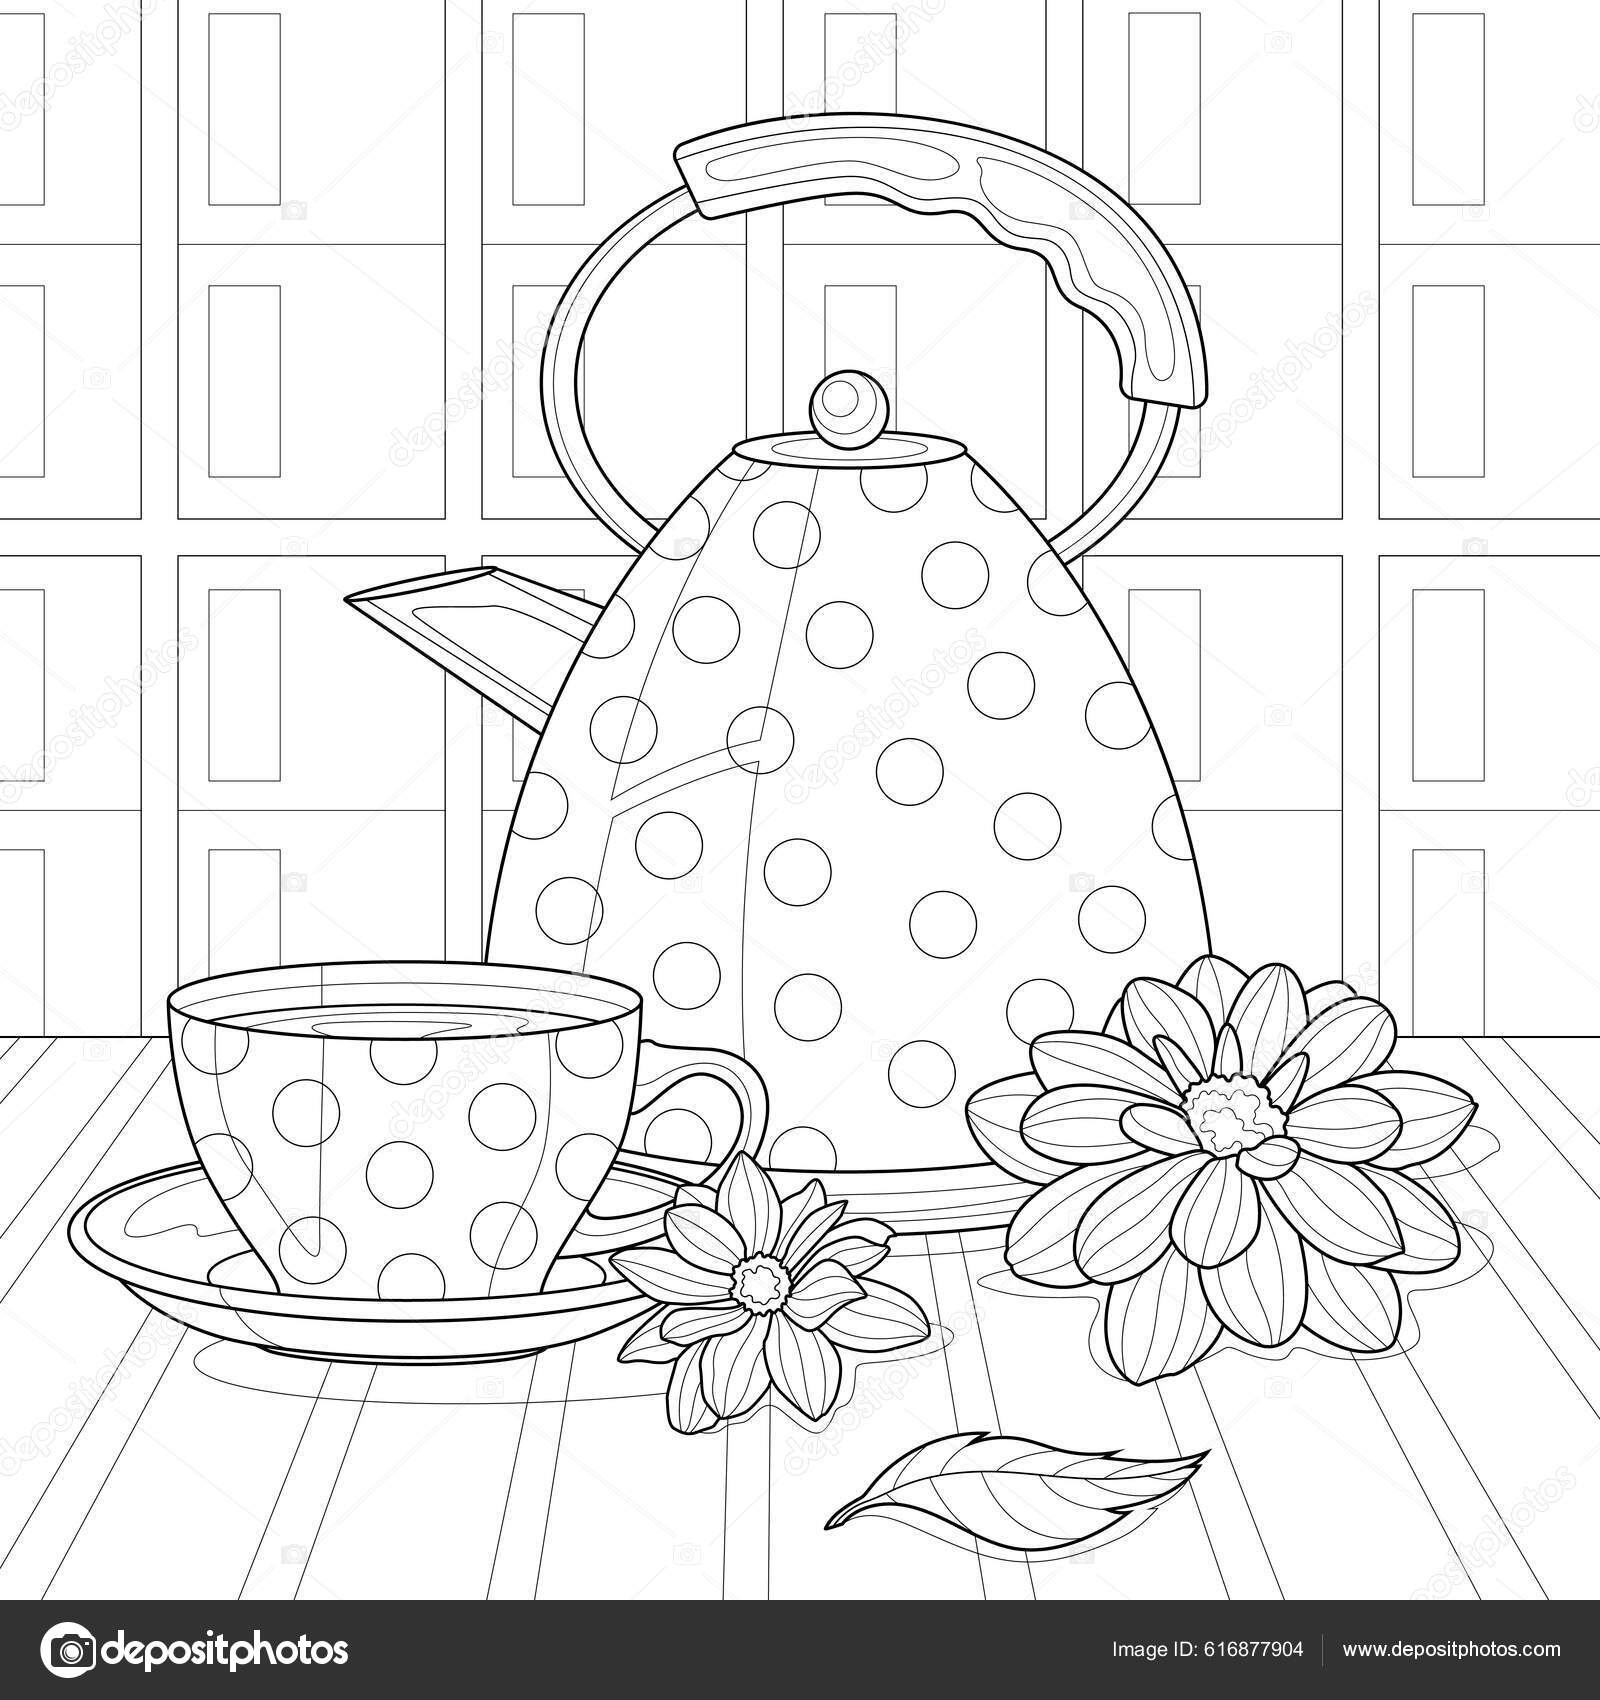 Black girl at picnic.Coloring book antistress for children and adults.  Illustration isolated on white background.Zen-tangle style. Stock Vector